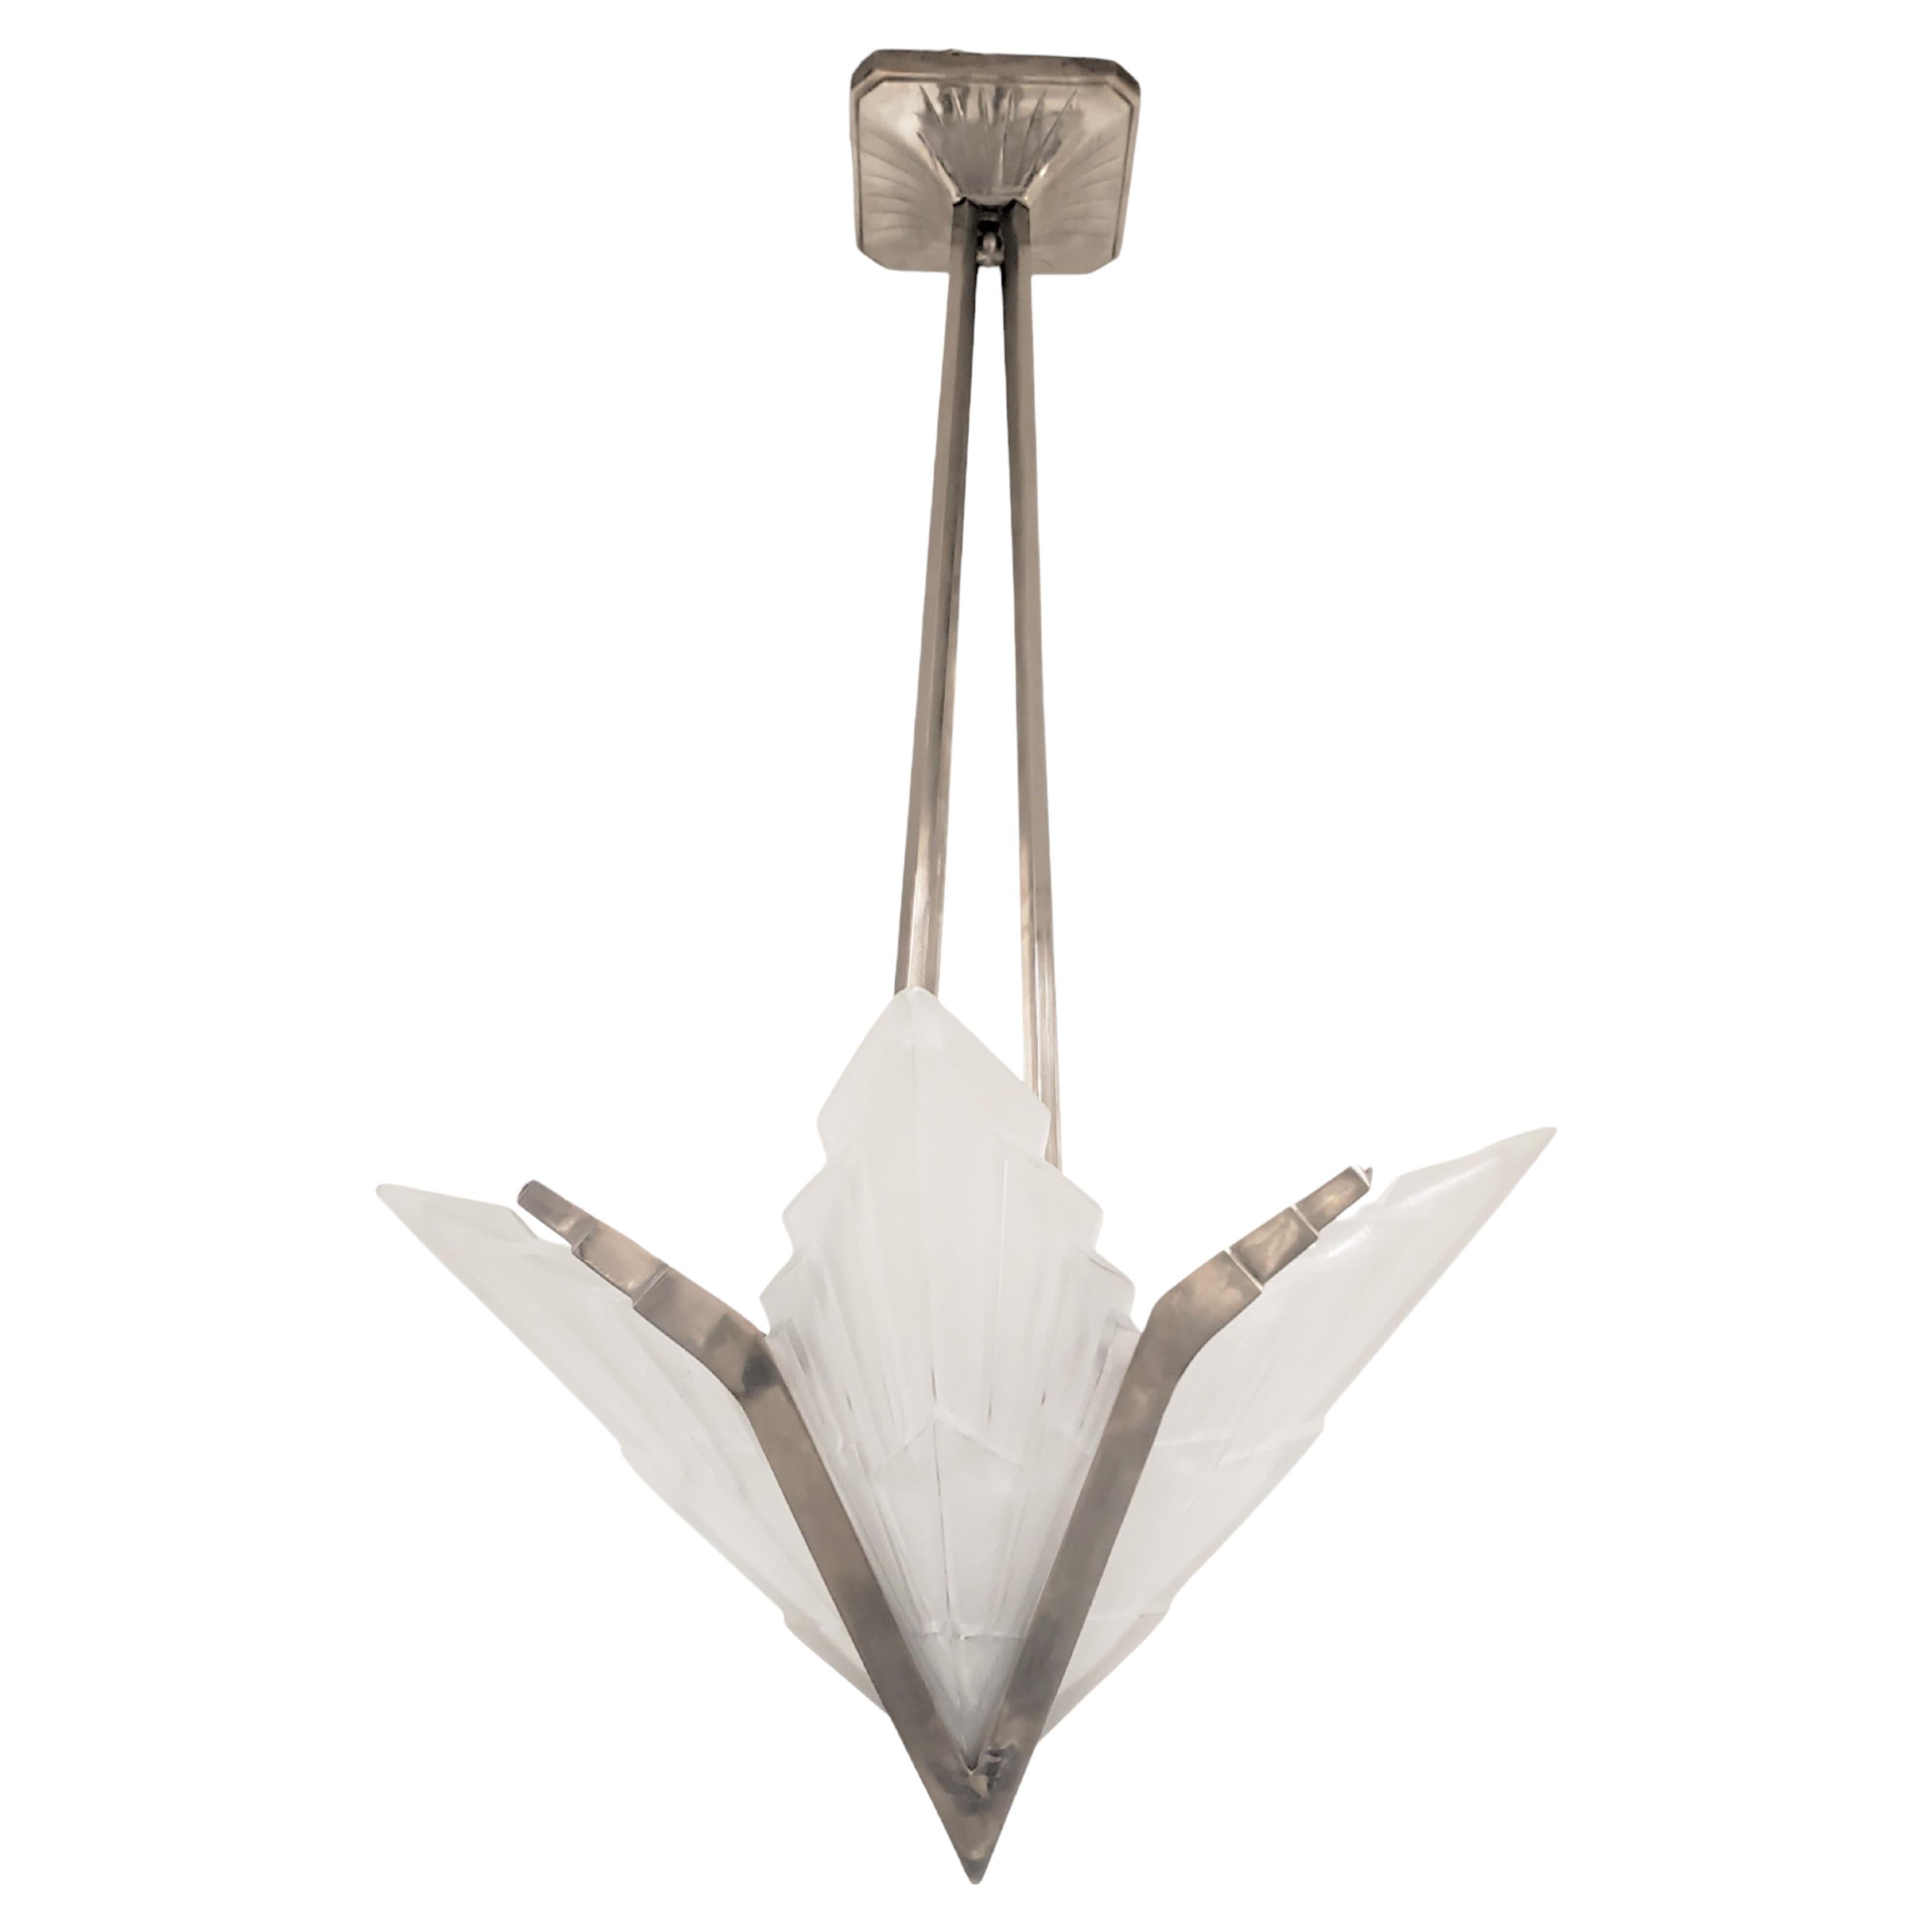 French Art Deco geometric motif chandelier signed Degue featuring four wing shaped frosted and molded art glass panels with chevron design, jagged ends and polished details. 
The architectural panels jut upward and outward in an unusual star